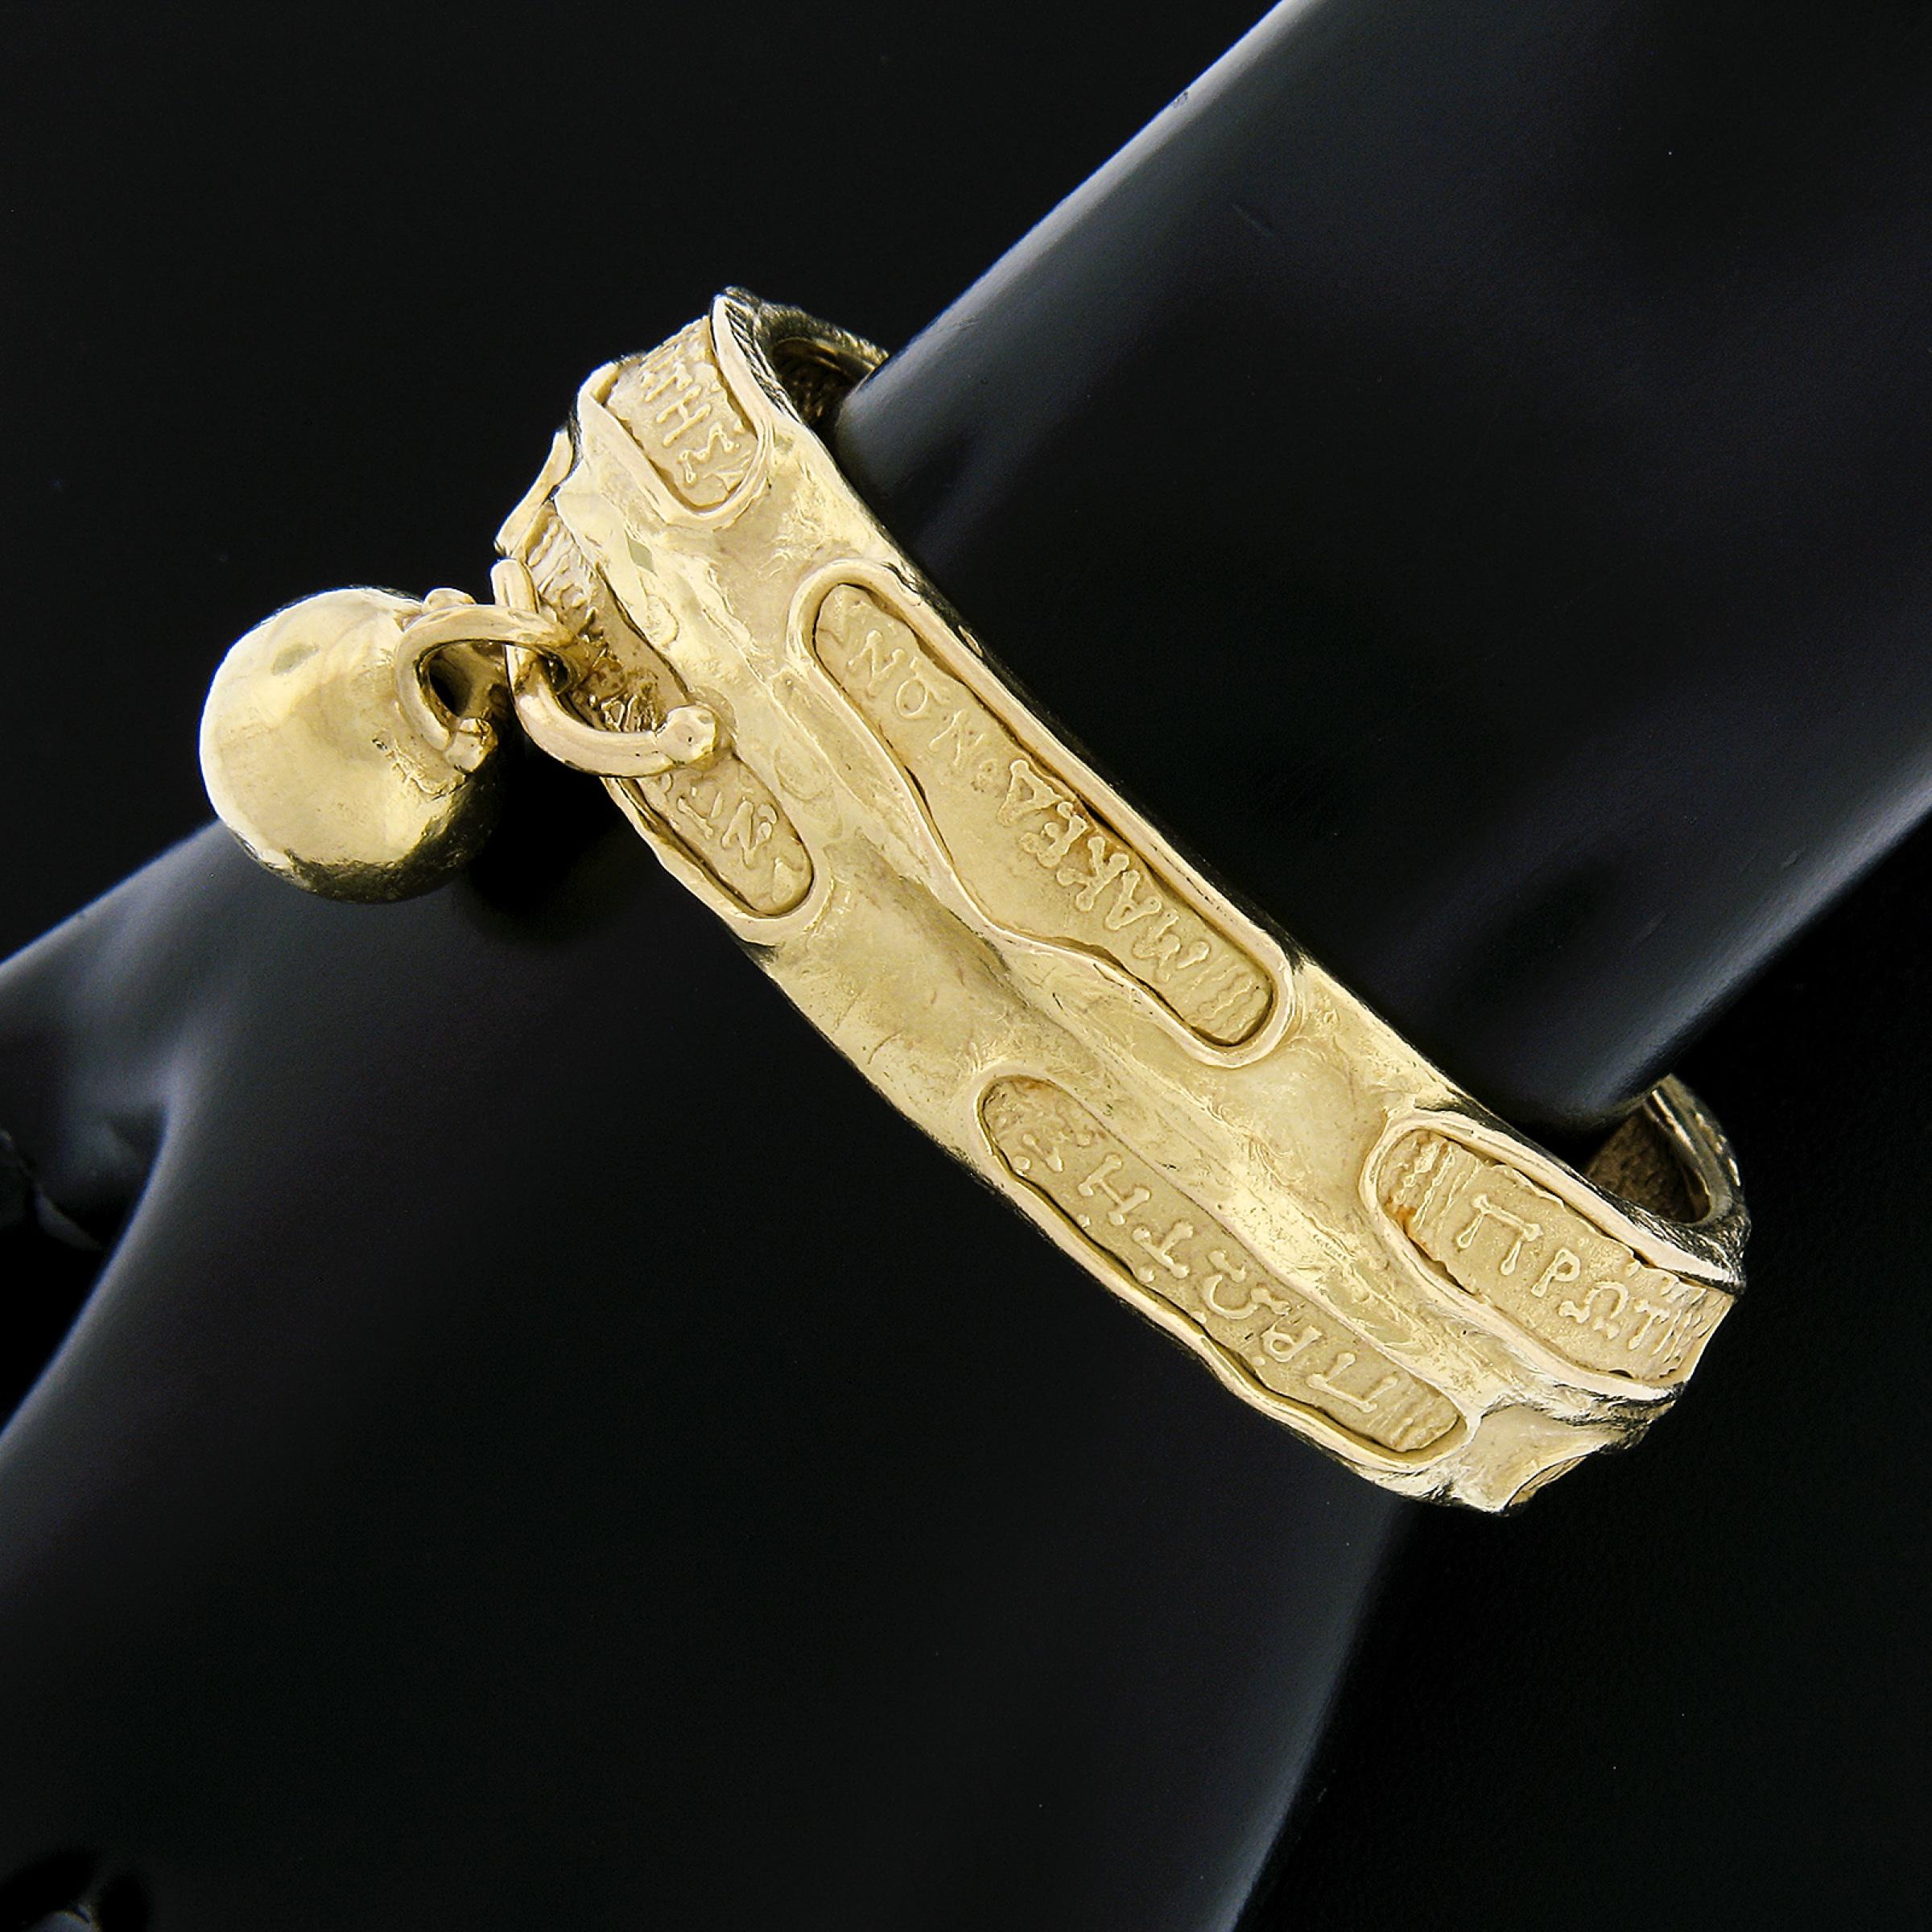 Material: Solid 18k Yellow Gold
Weight: 92.30 Grams
Chain Type: Textured Greek Writing Open Cuff
Length: Will fit up to a 6 to 6.25 inch wrist.
Clasp: No Clasp
Width: 16.1mm (0.63